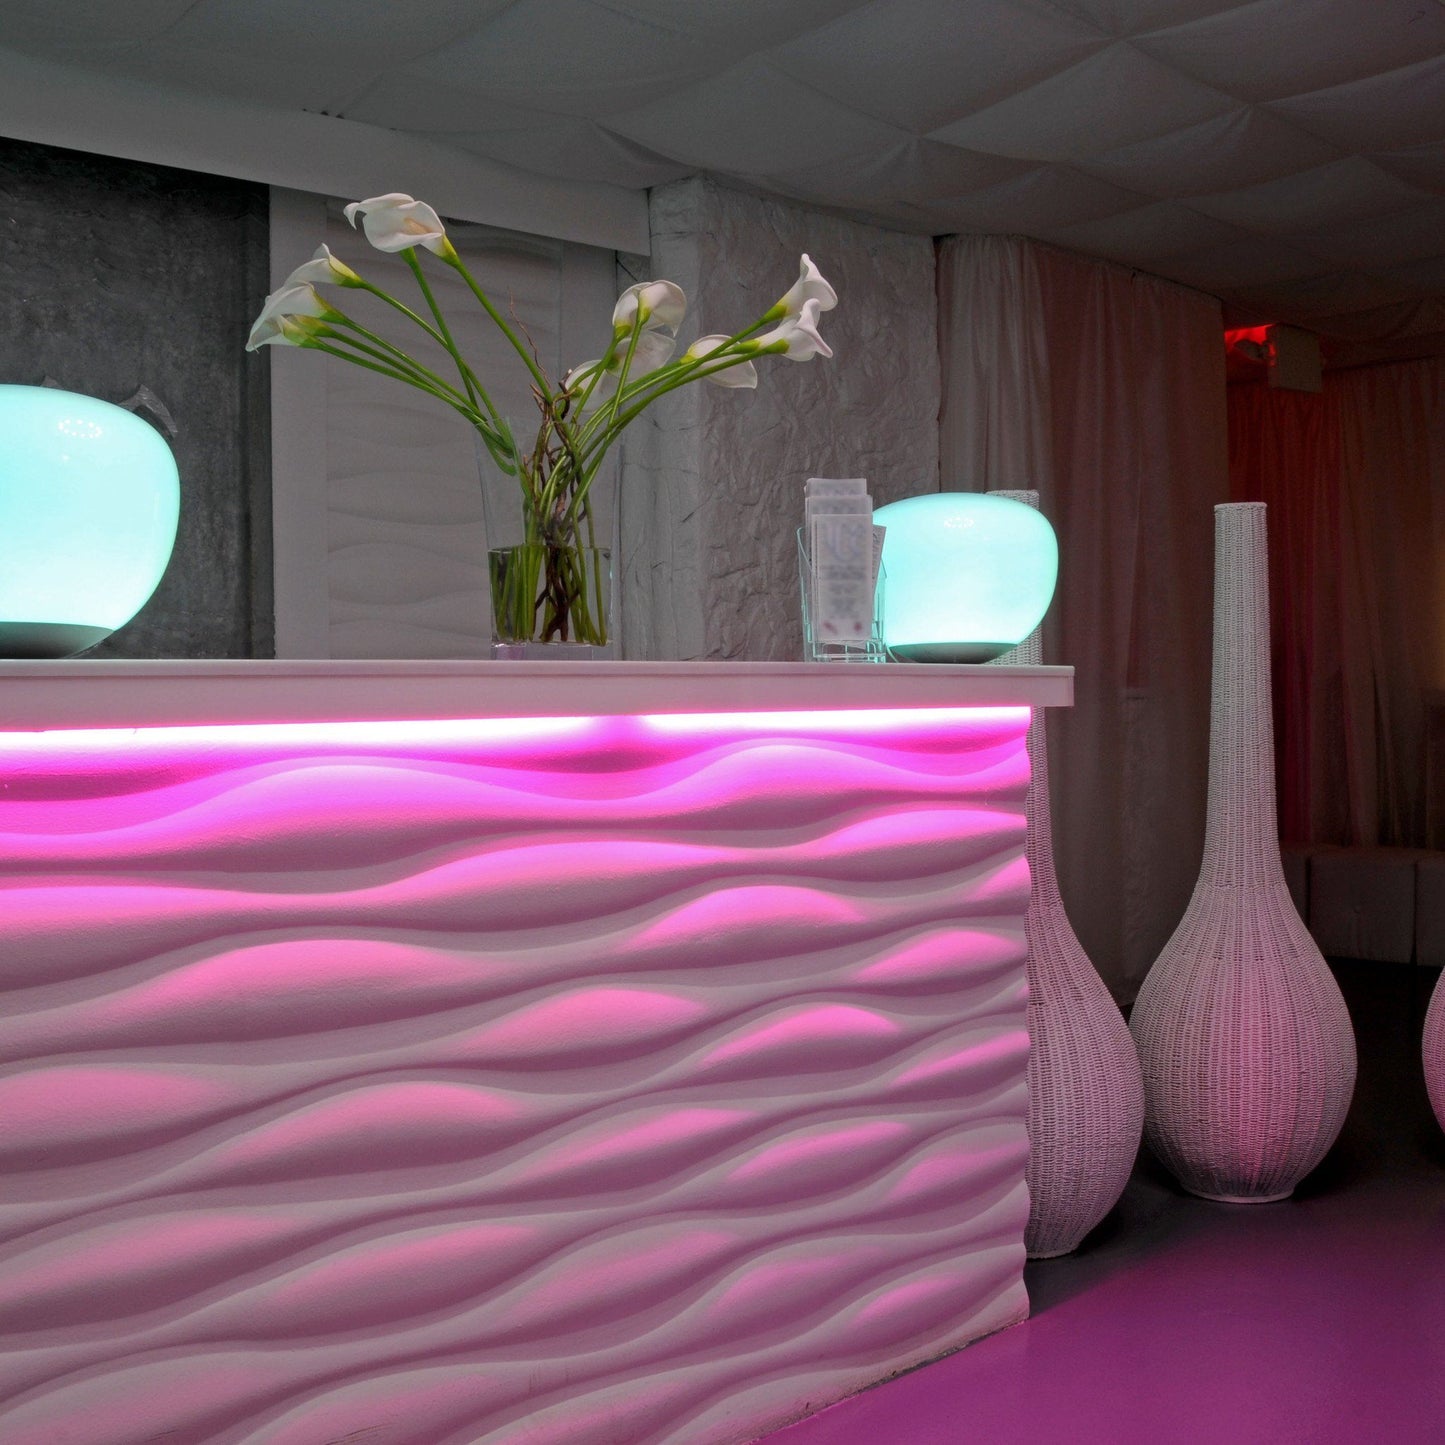 hotel lobby area with waveform front desk, lilies in vase, and pink led strip lighting clearly installed